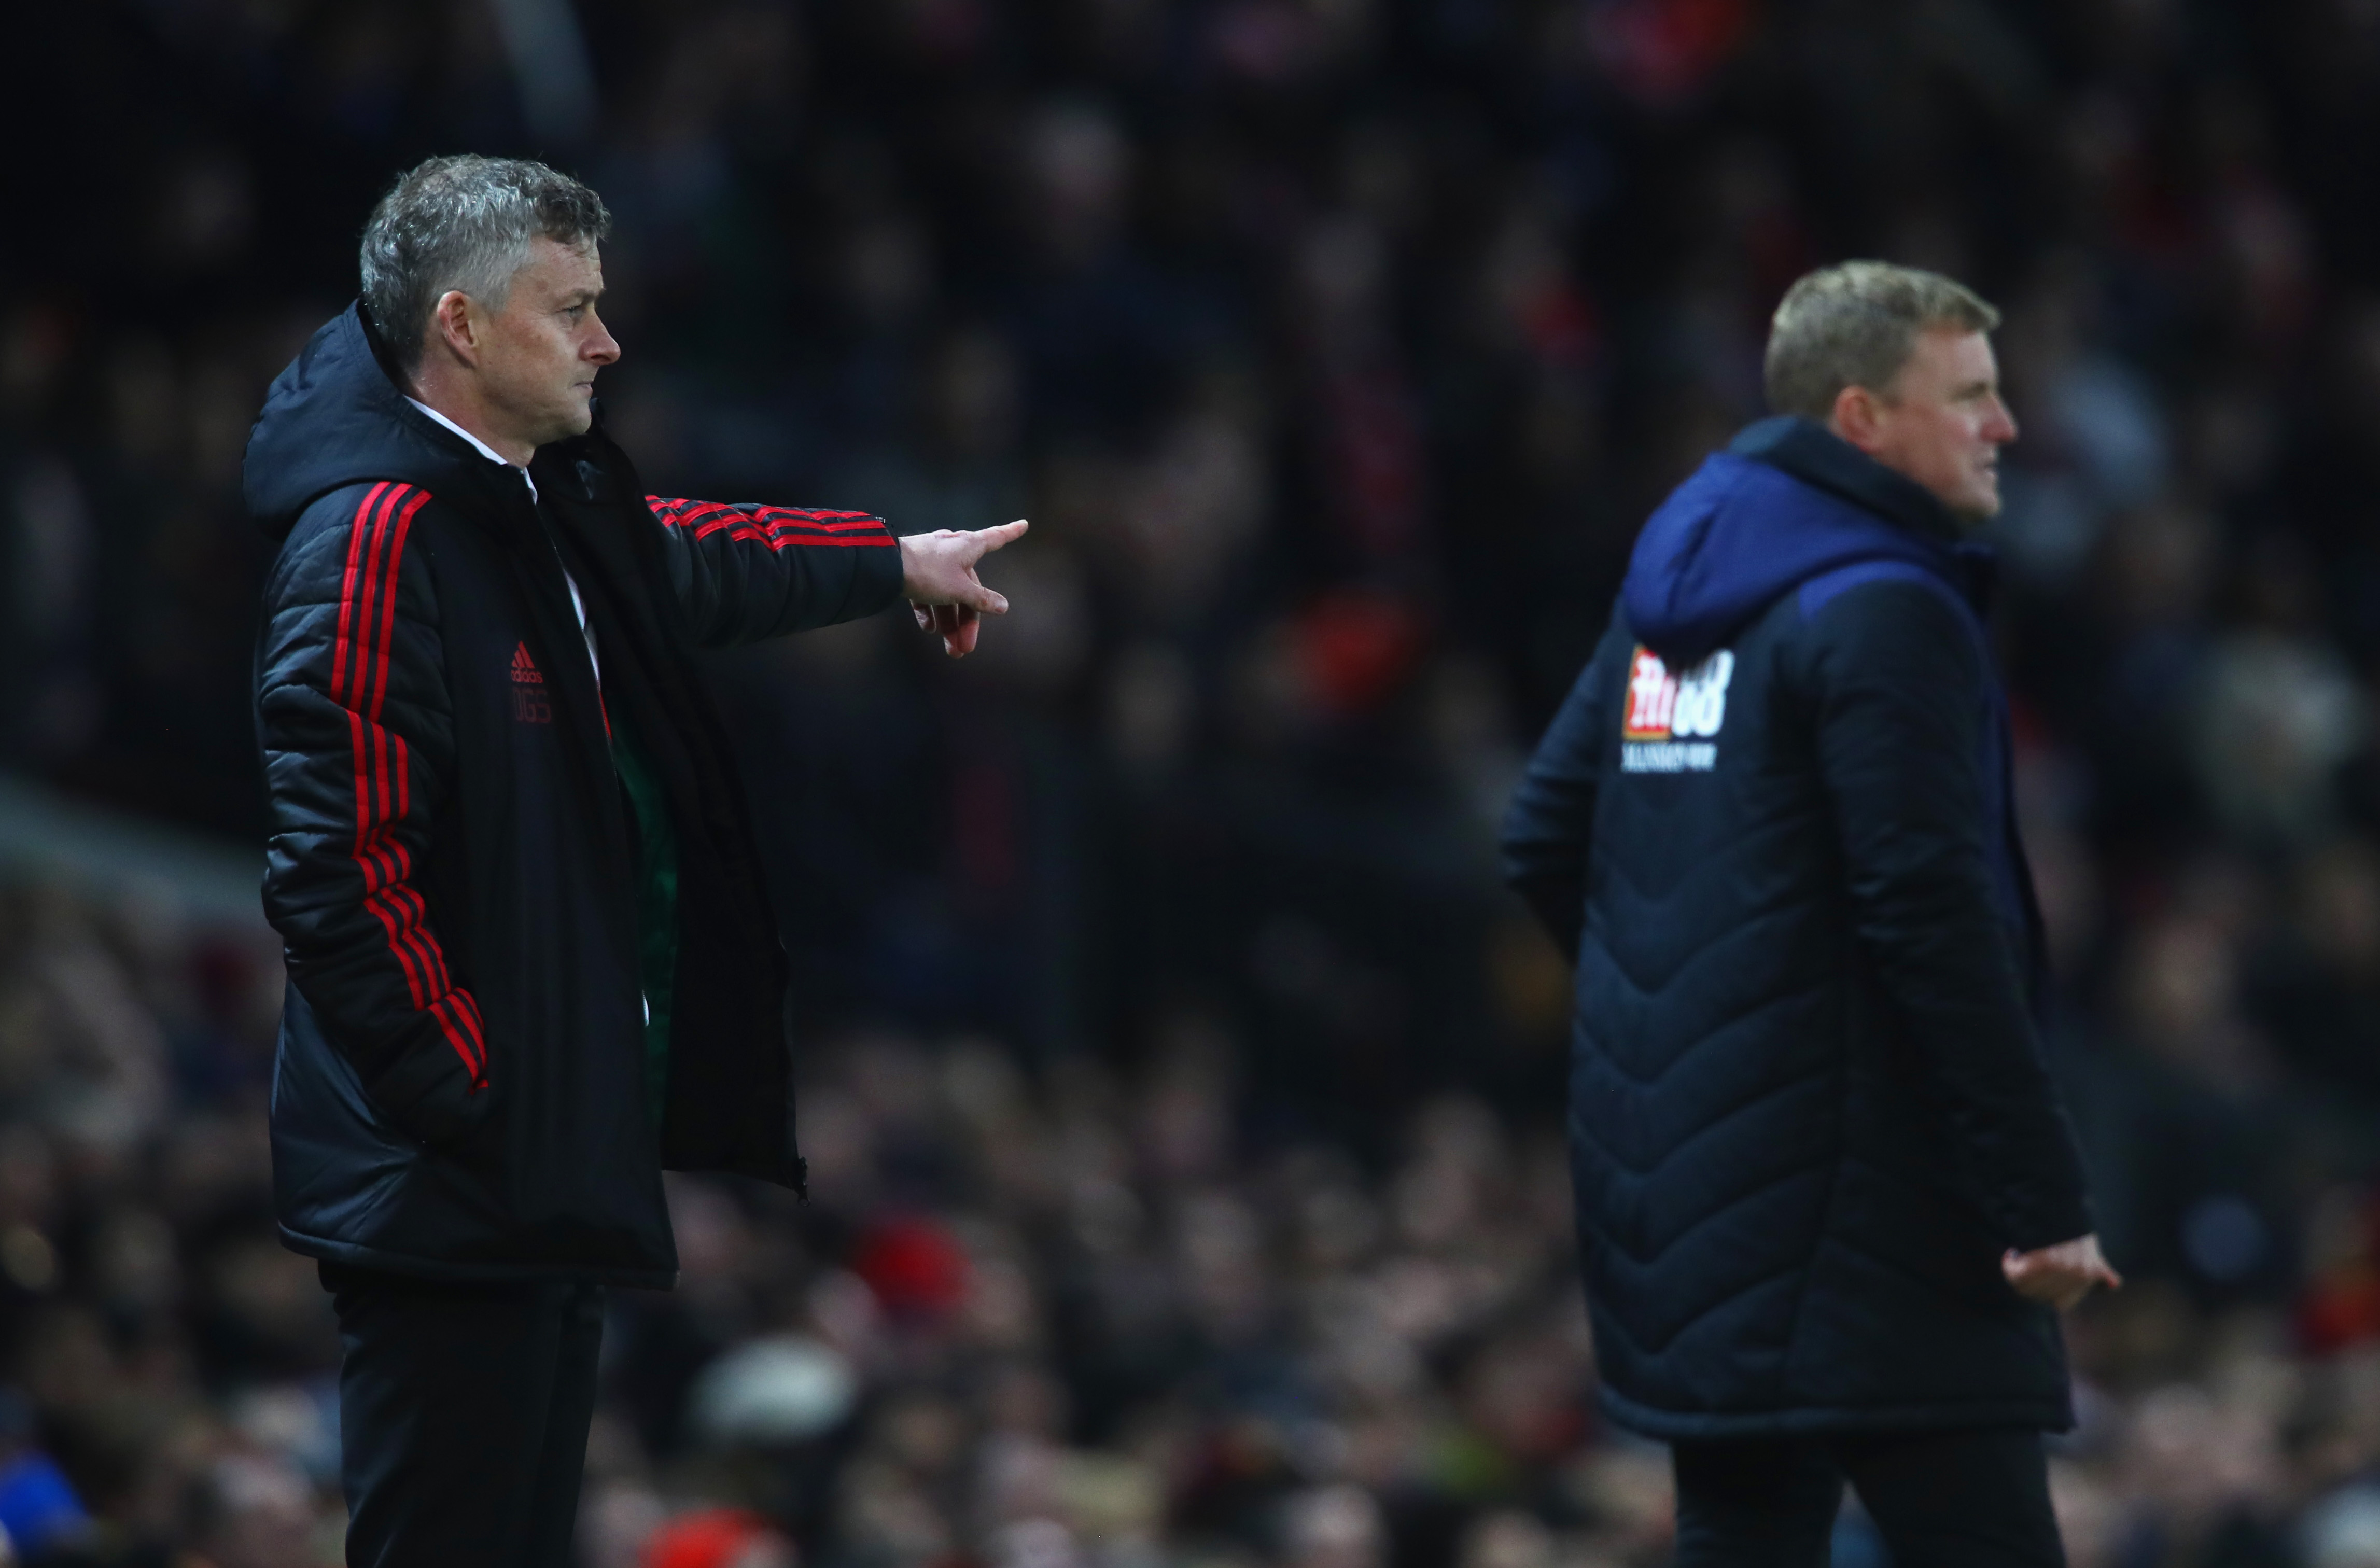 MANCHESTER, ENGLAND - DECEMBER 30:  Ole Gunnar Solskjaer, Interim Manager of Manchester United points as Eddie Howe, Manager of AFC Bournemouth looks on during the Premier League match between Manchester United and AFC Bournemouth at Old Trafford on December 30, 2018 in Manchester, United Kingdom.  (Photo by Clive Brunskill/Getty Images)